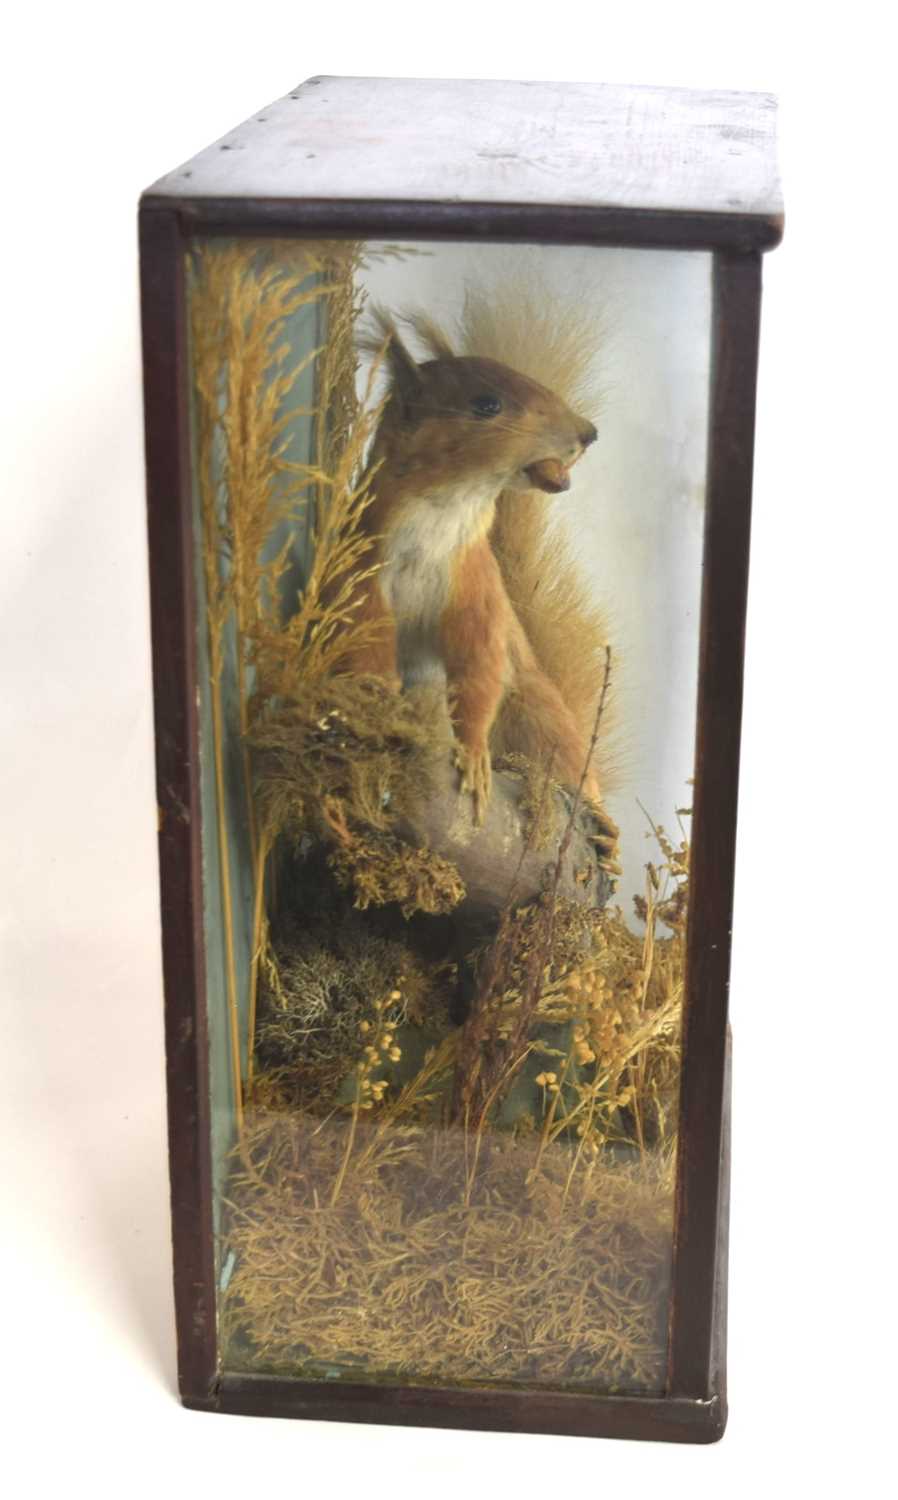 Victorian taxidermy cased red squirrel (Sciurus vulgaris) with nut in mouth in three glass Pannel - Image 4 of 4